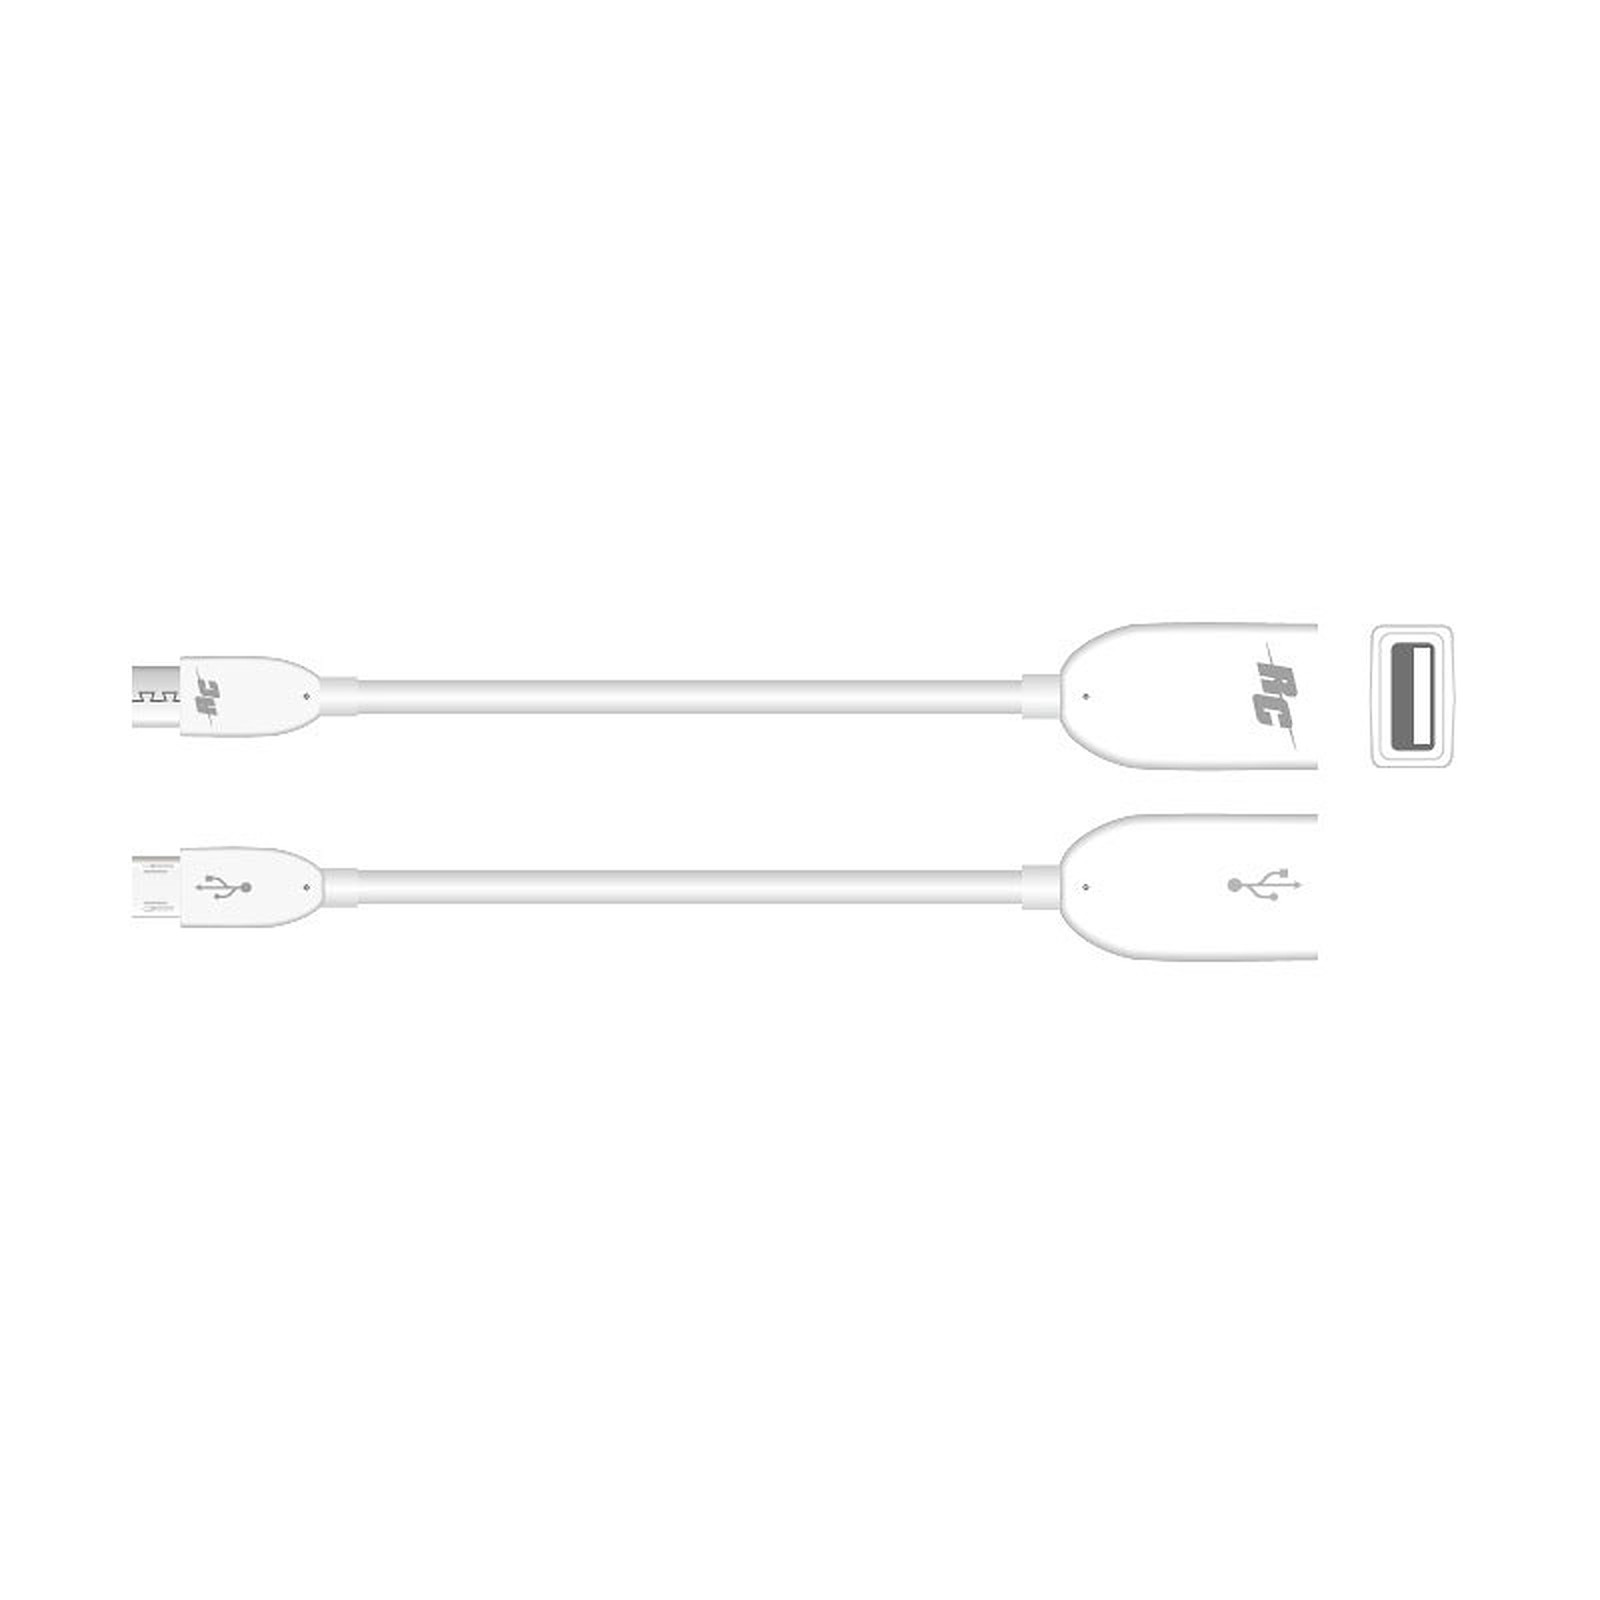 Real Cable OTG-1 - USB Real Cable - Occasion